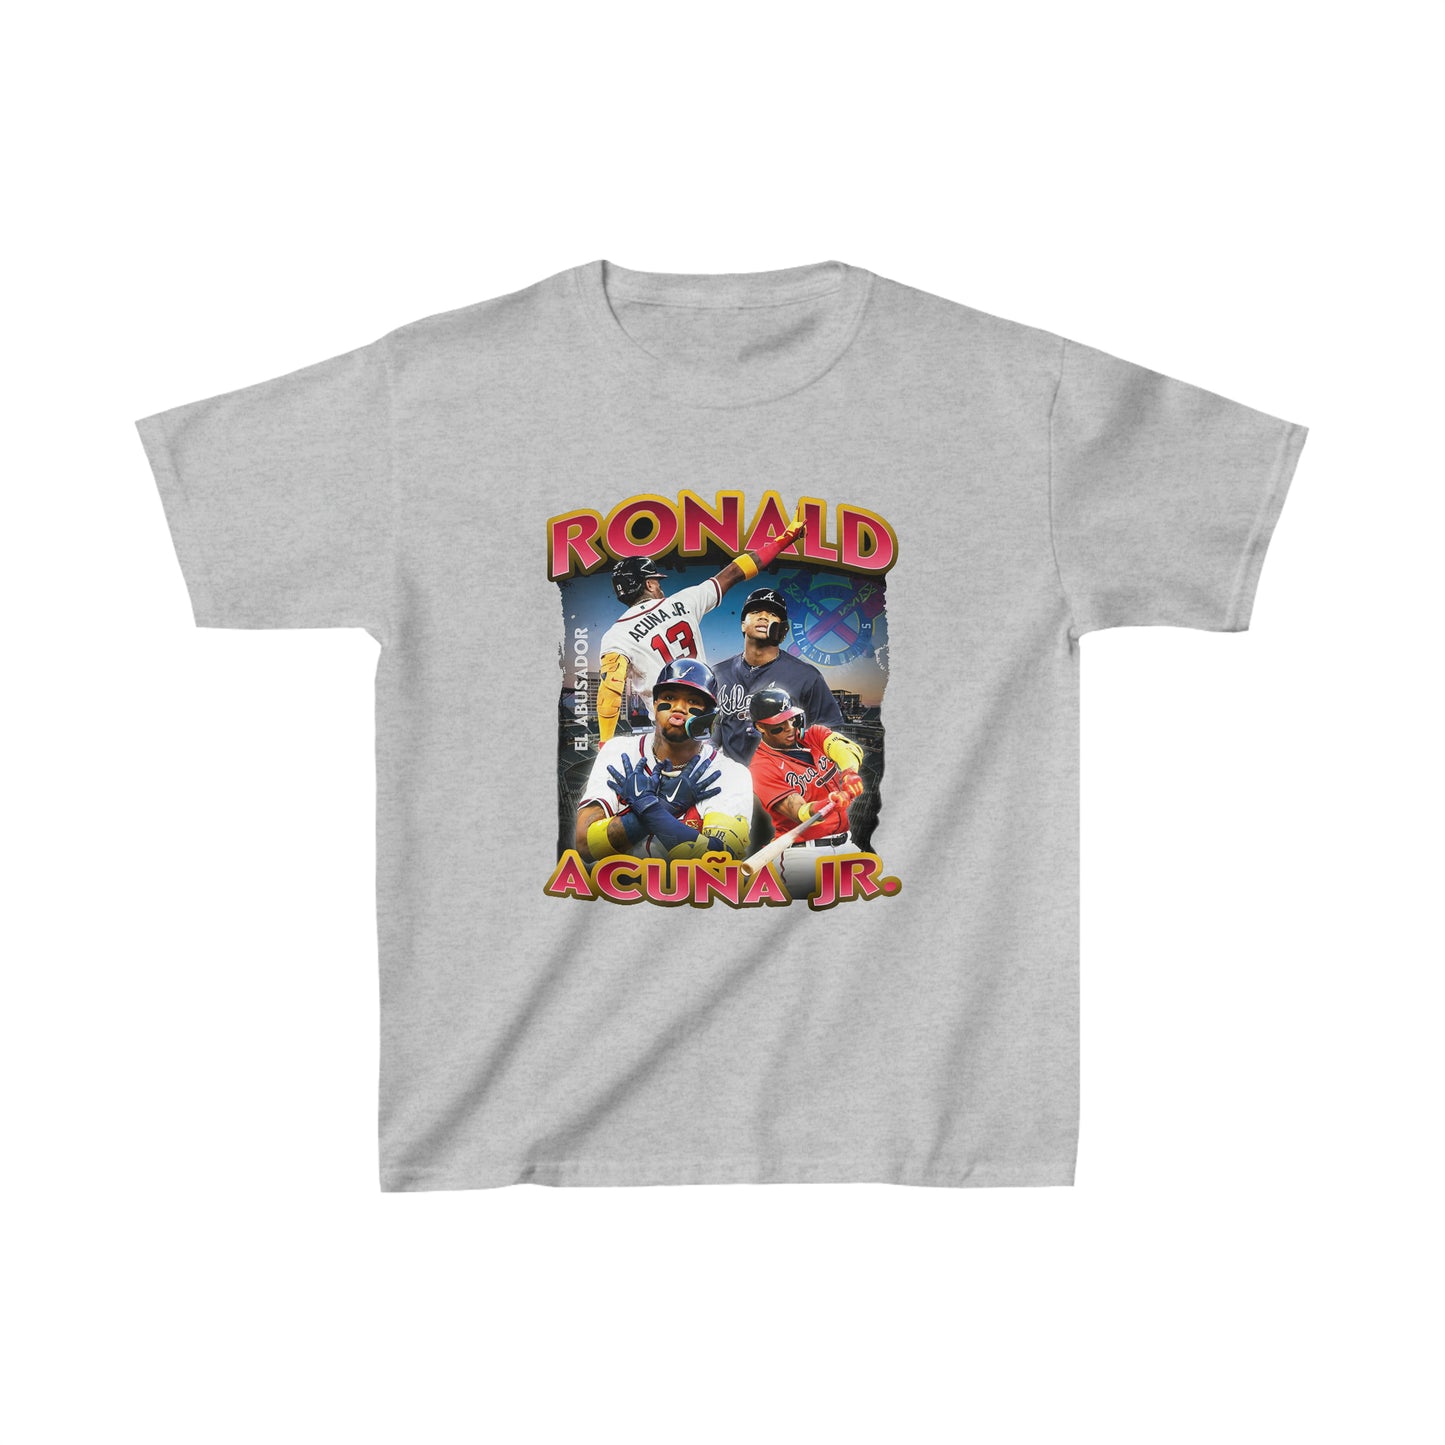 Ronald Acuña Jr. Kids Fan T-Shirt - Soft Cotton Blend - Perfect for Young Braves Fans